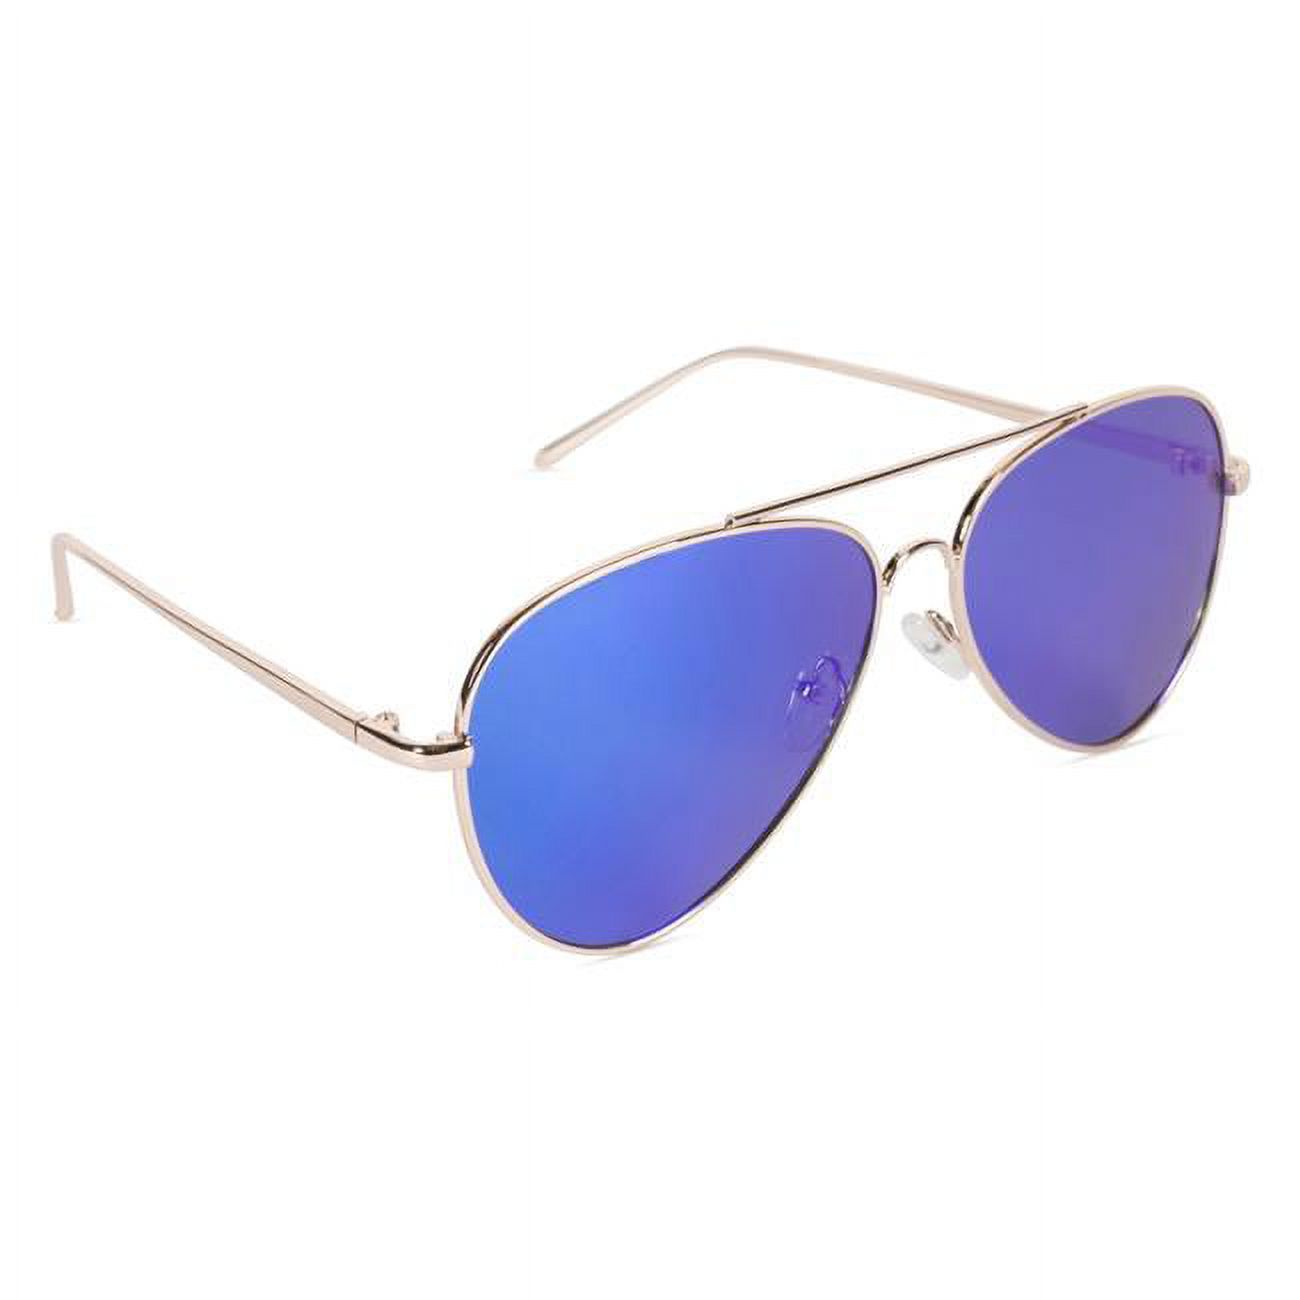 Inner Vision Military Style Aviator Sunglasses, Polarized & Revo Lens, Scratch Resistant, UV400 Protection With Case - Gold Frame, Electric Blue Lens - image 1 of 10